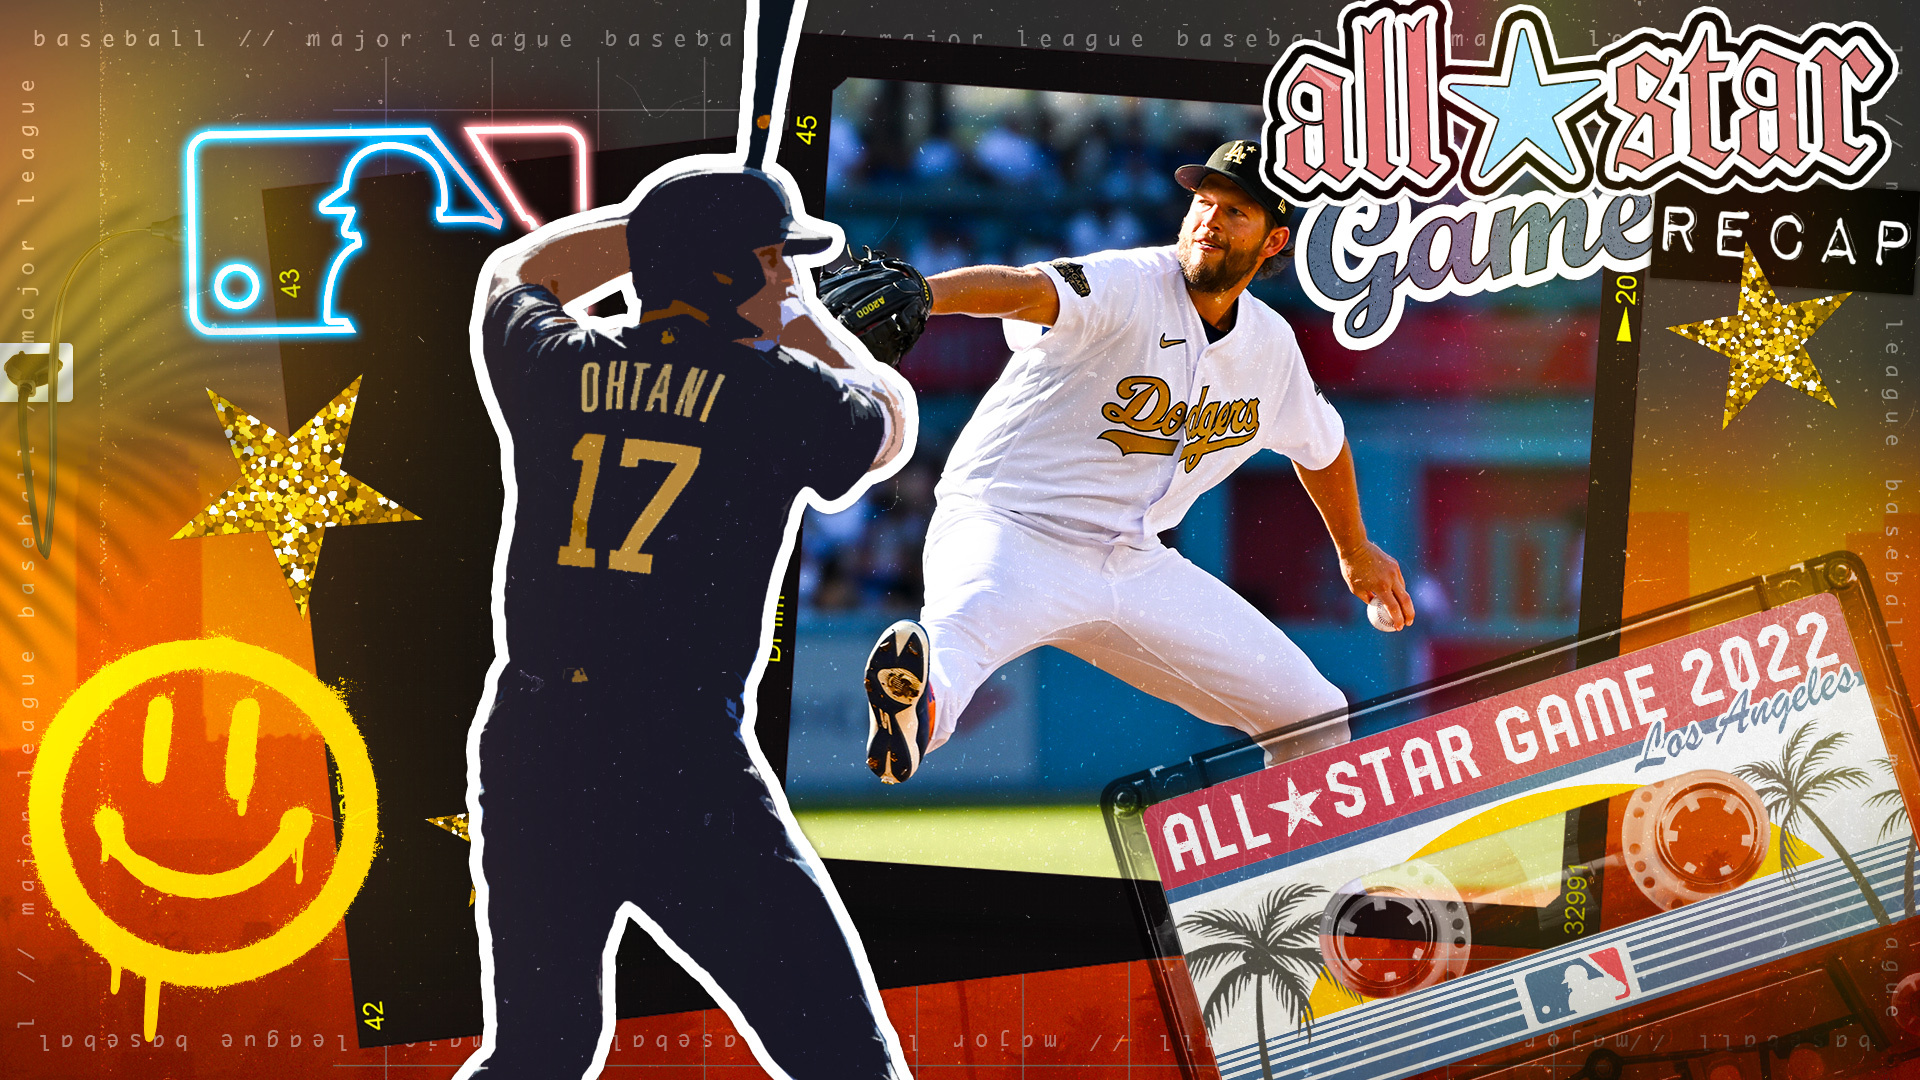 How to watch the 2021 MLB All-Star Game on Fox - McCovey Chronicles